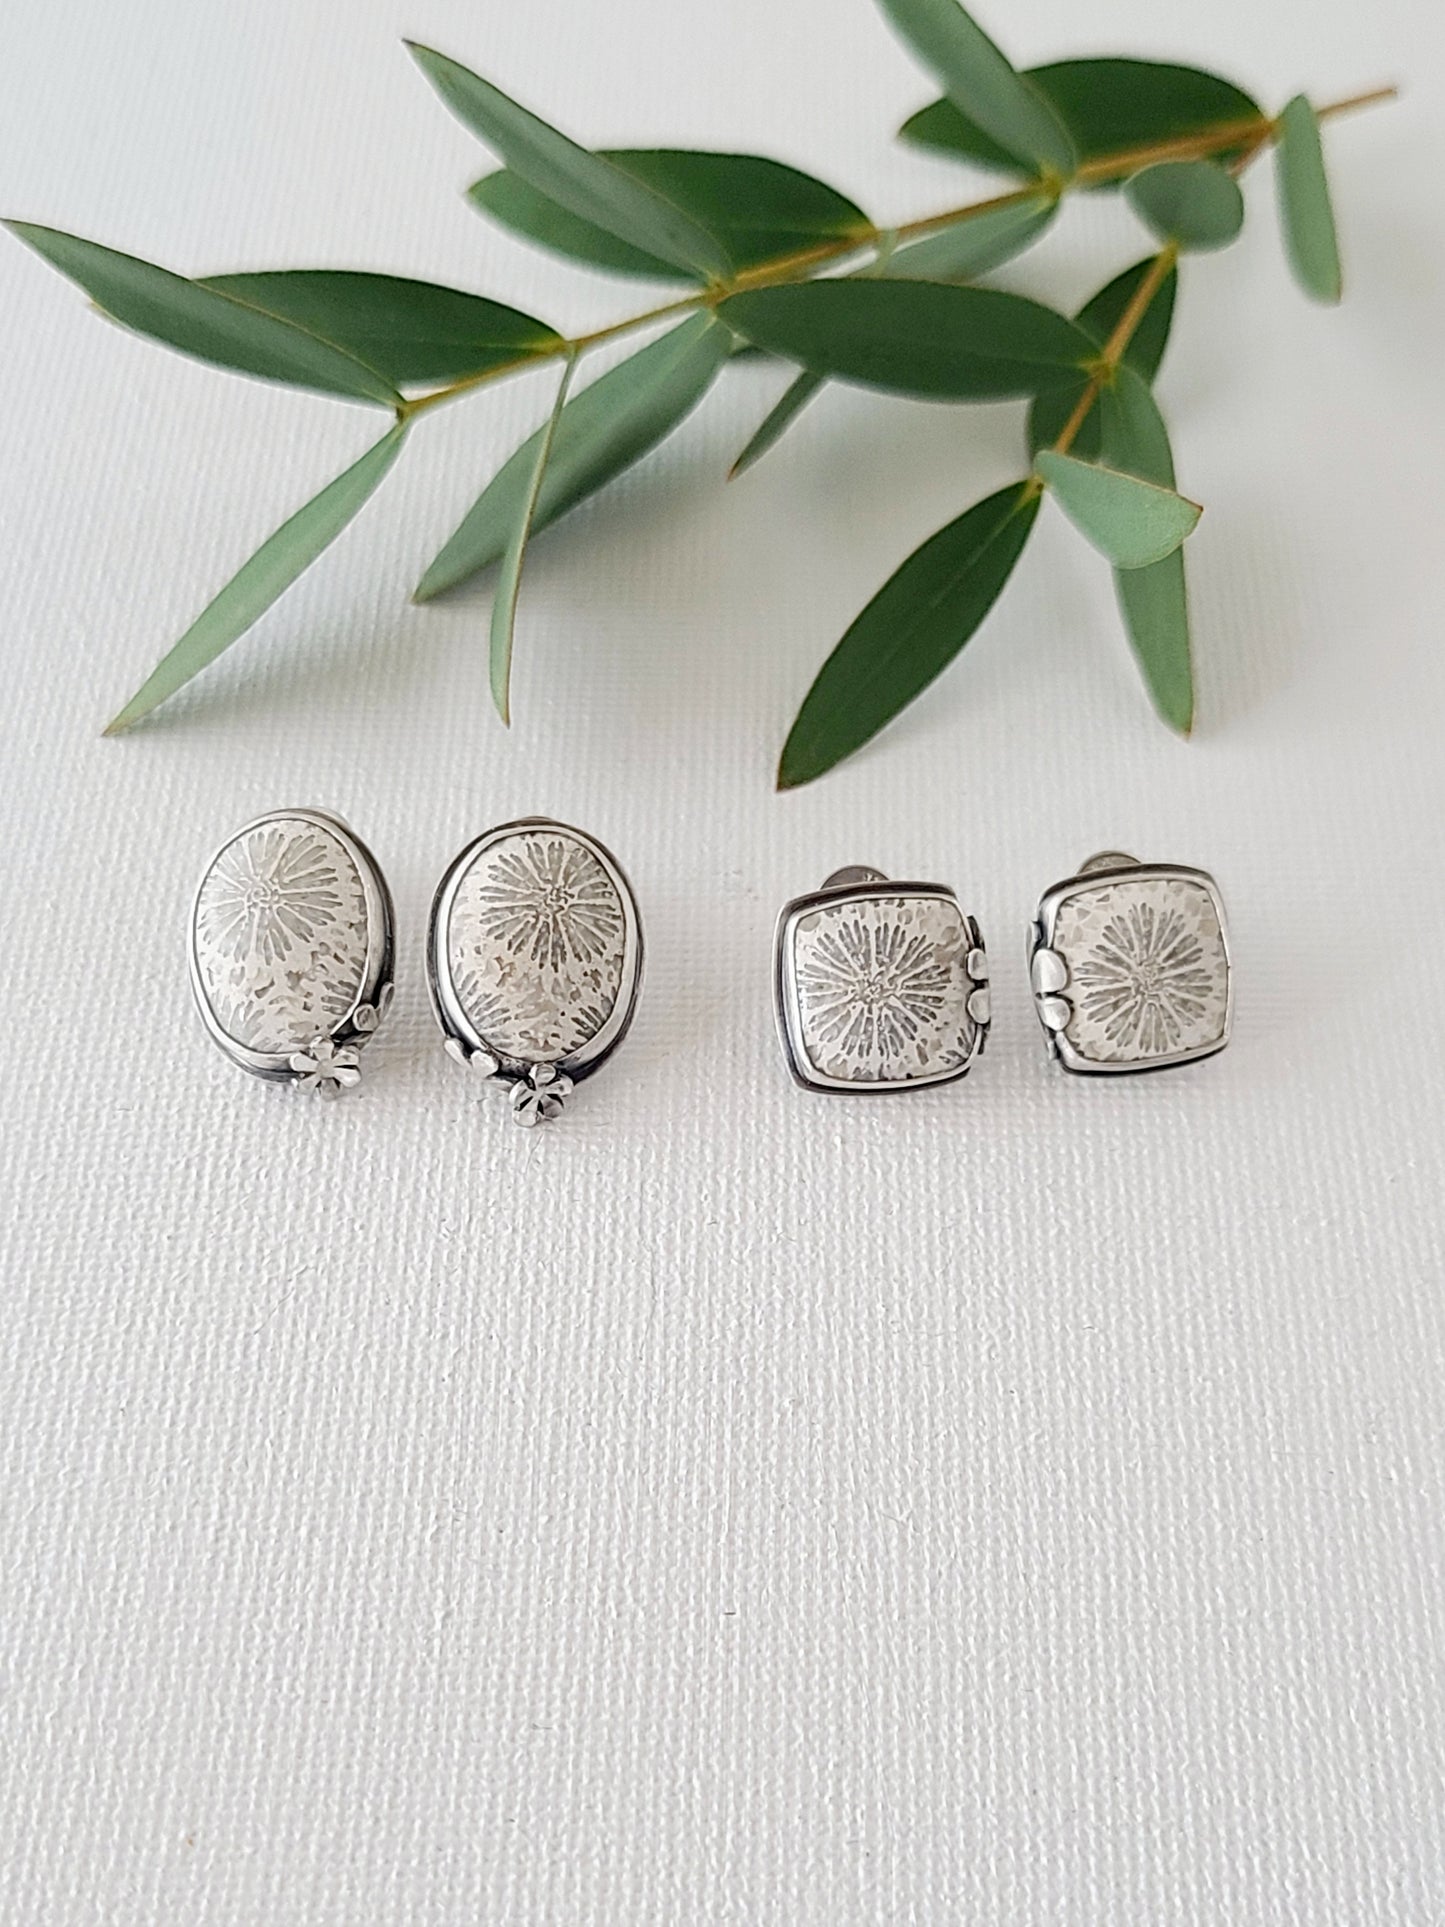 Fossil Flower Studs-white & gray squares